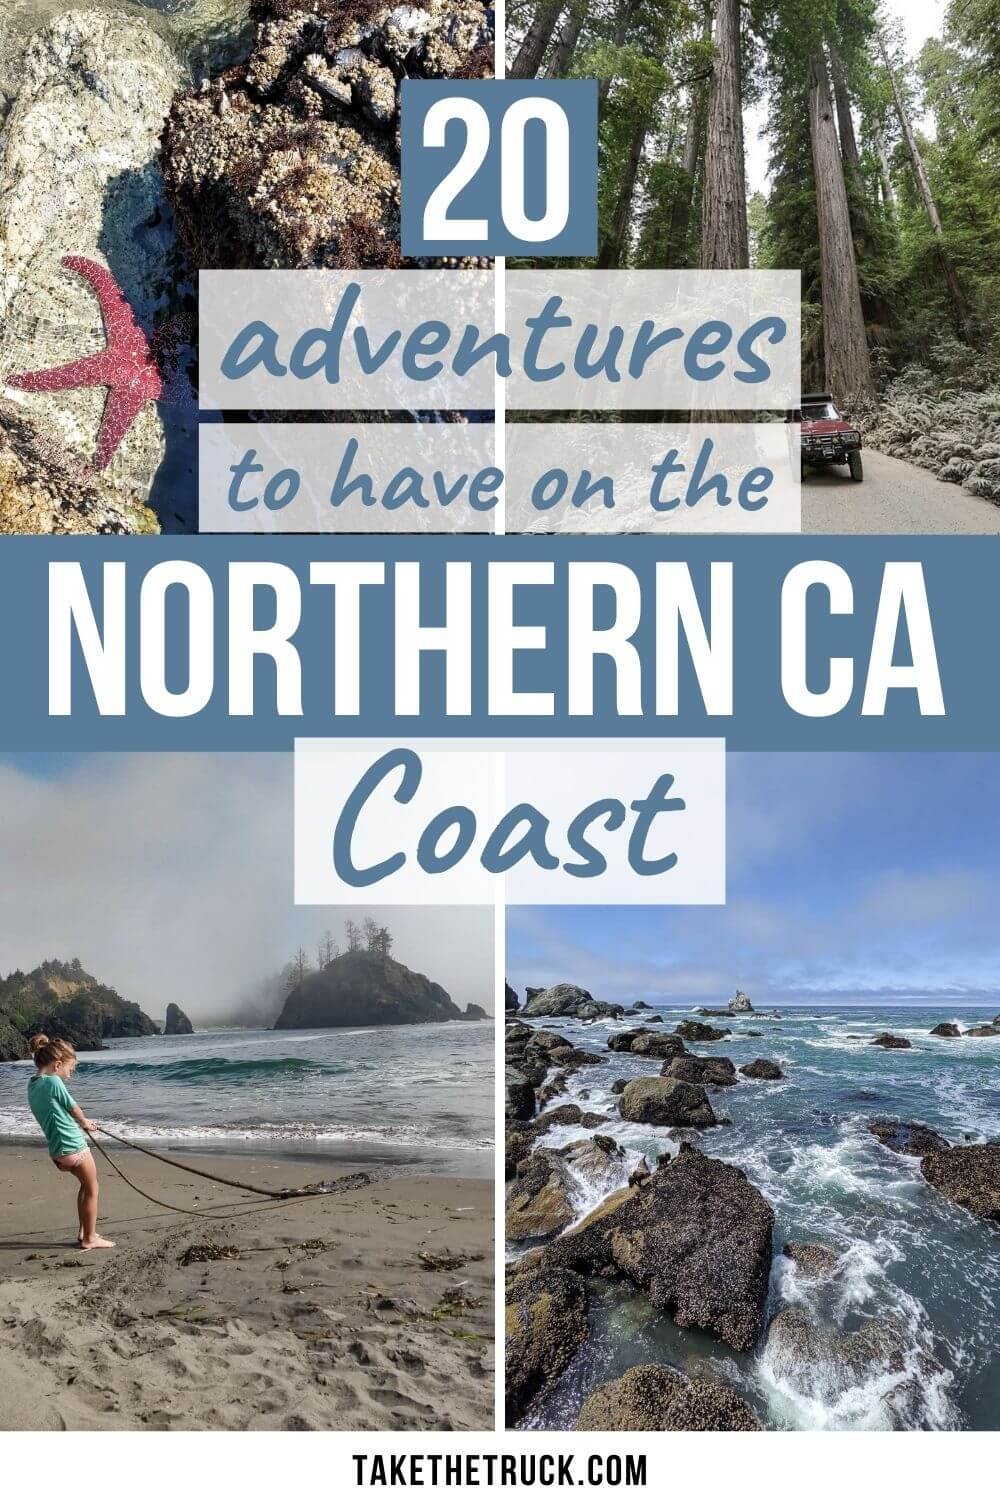 northern california road trip - things to do in redwood national park northern california - northern california road trip itinerary - things to do in northern california coast